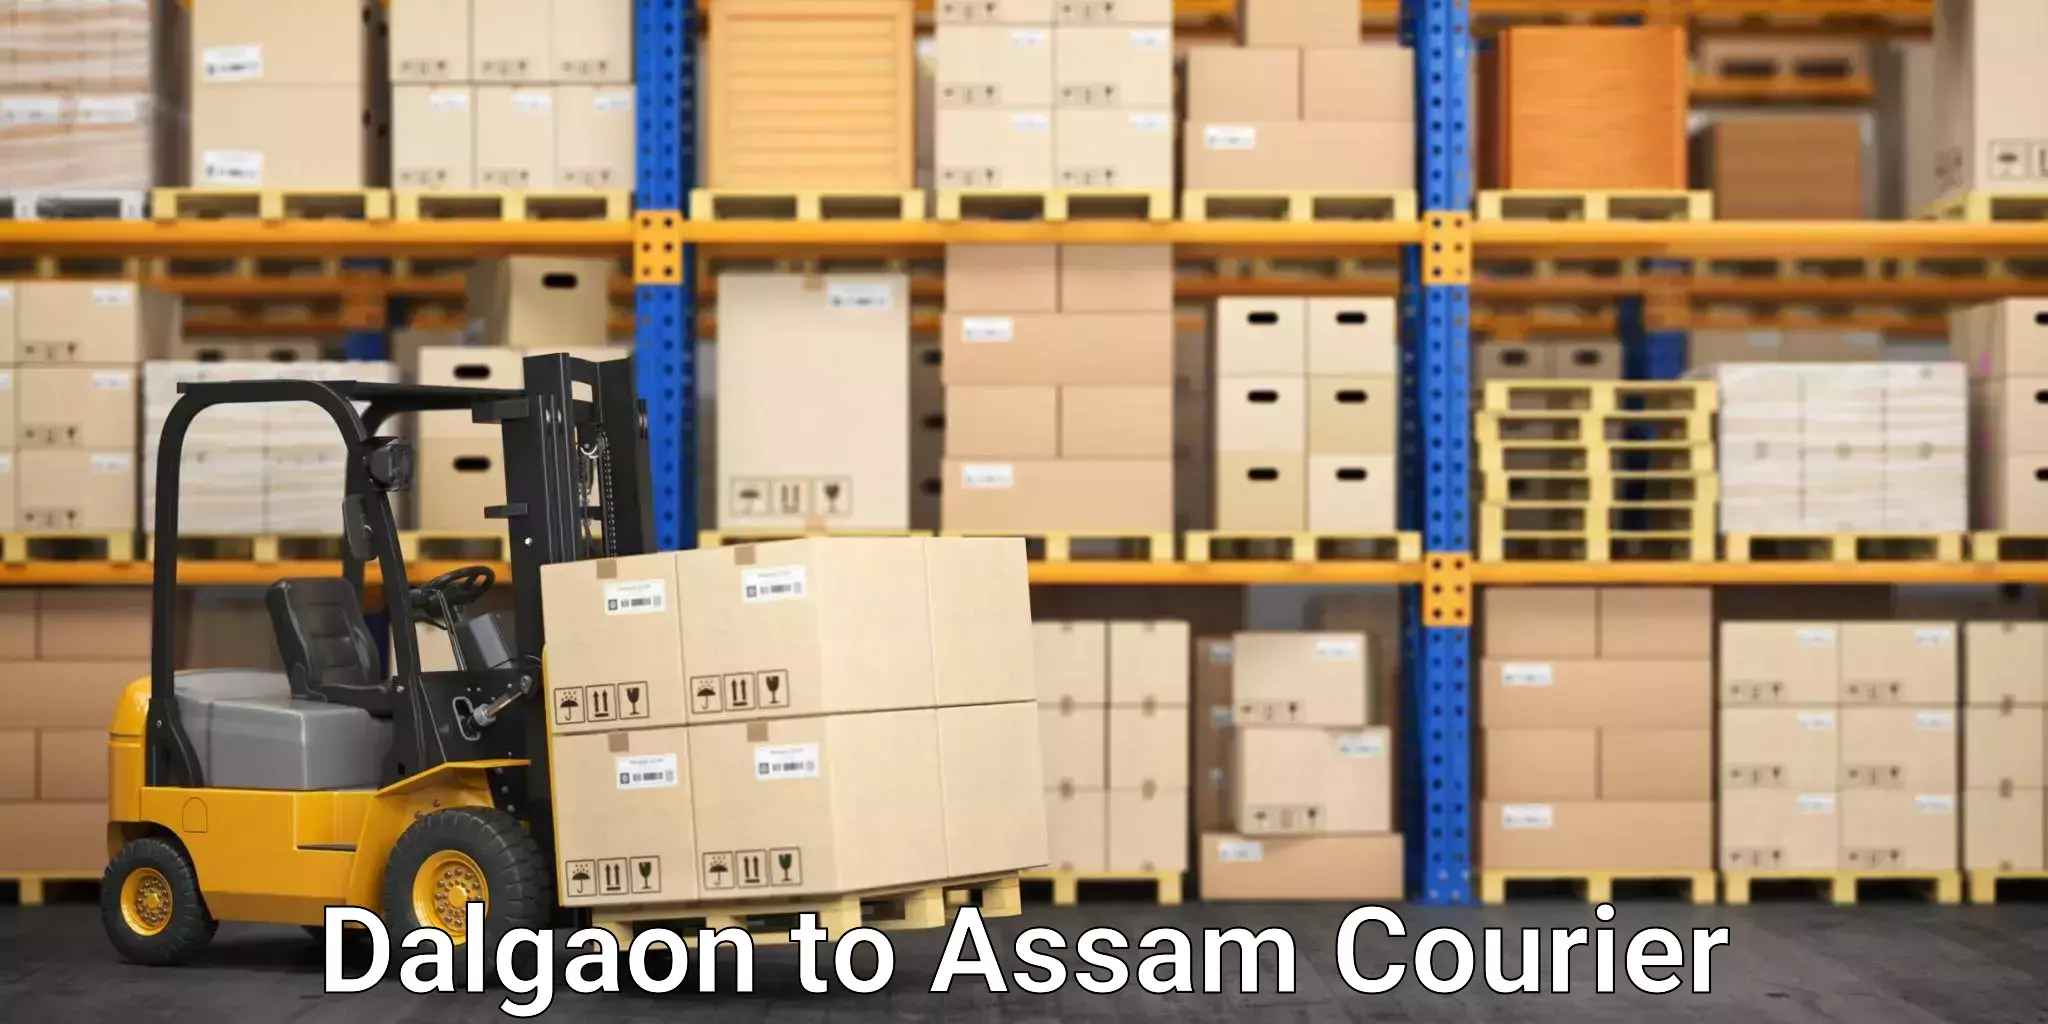 Fast delivery service Dalgaon to Assam